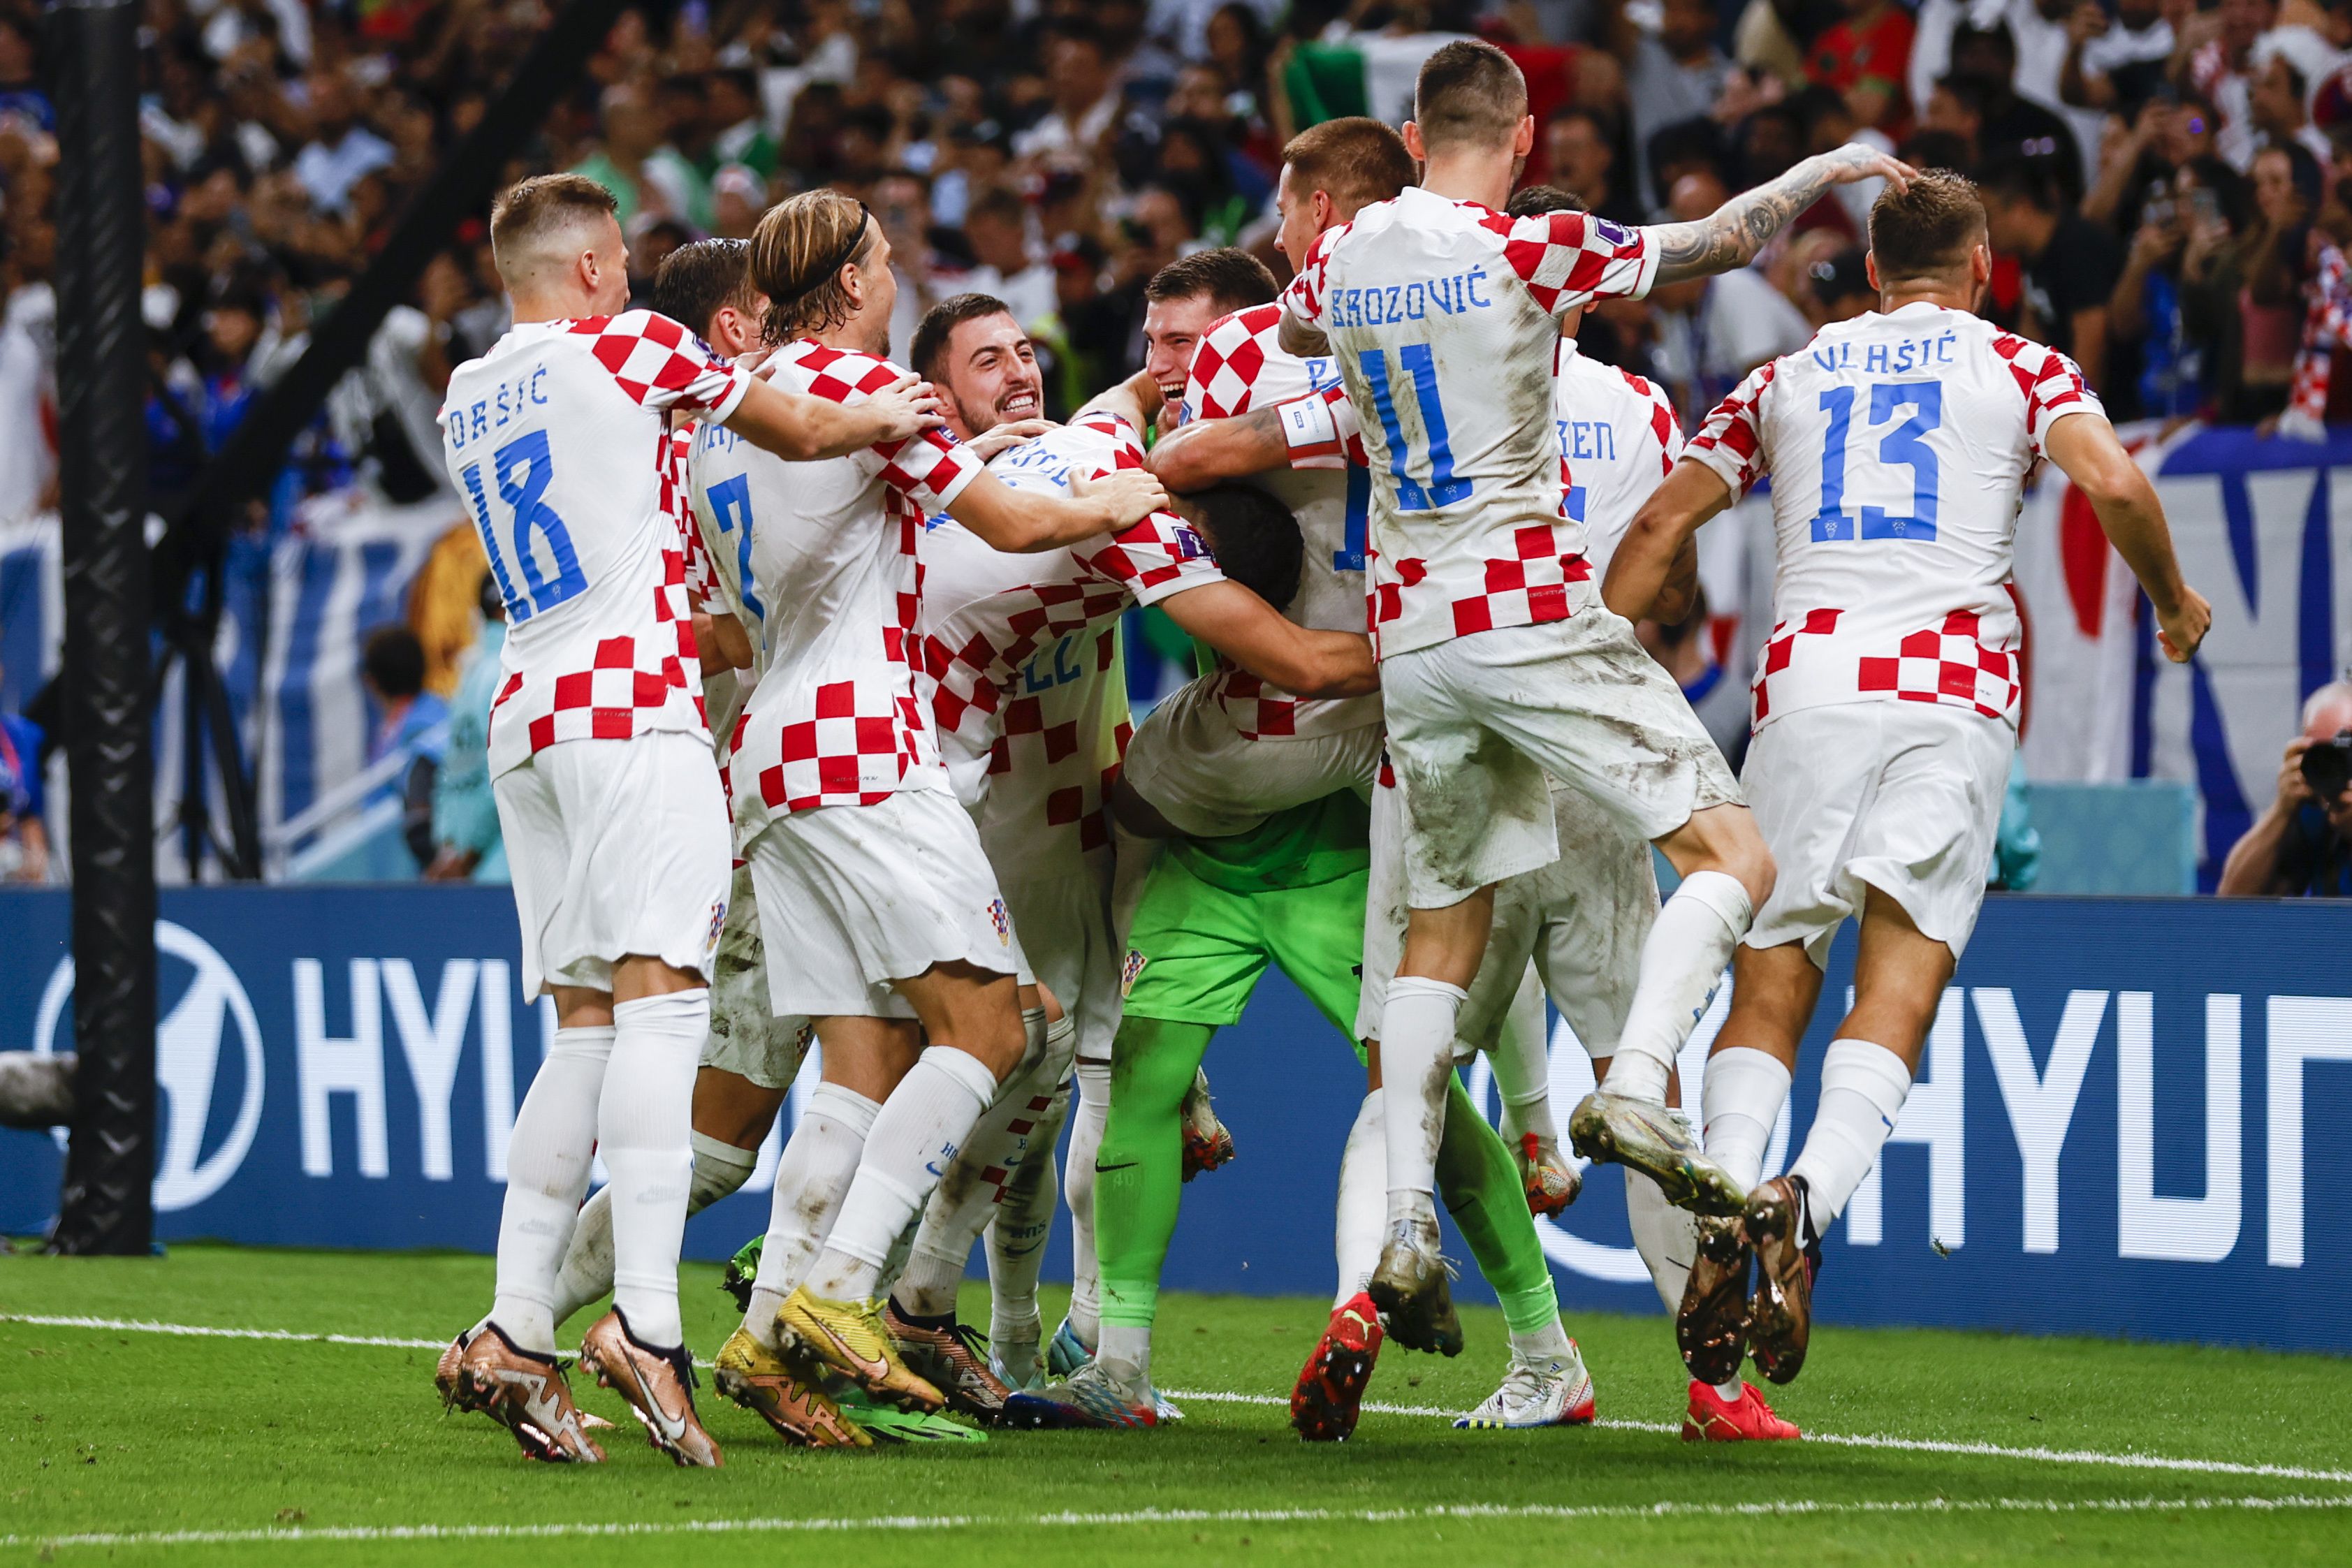 Croatia defeats Brazil in a penalty shootout in the quarterfinals of World Cup 2022